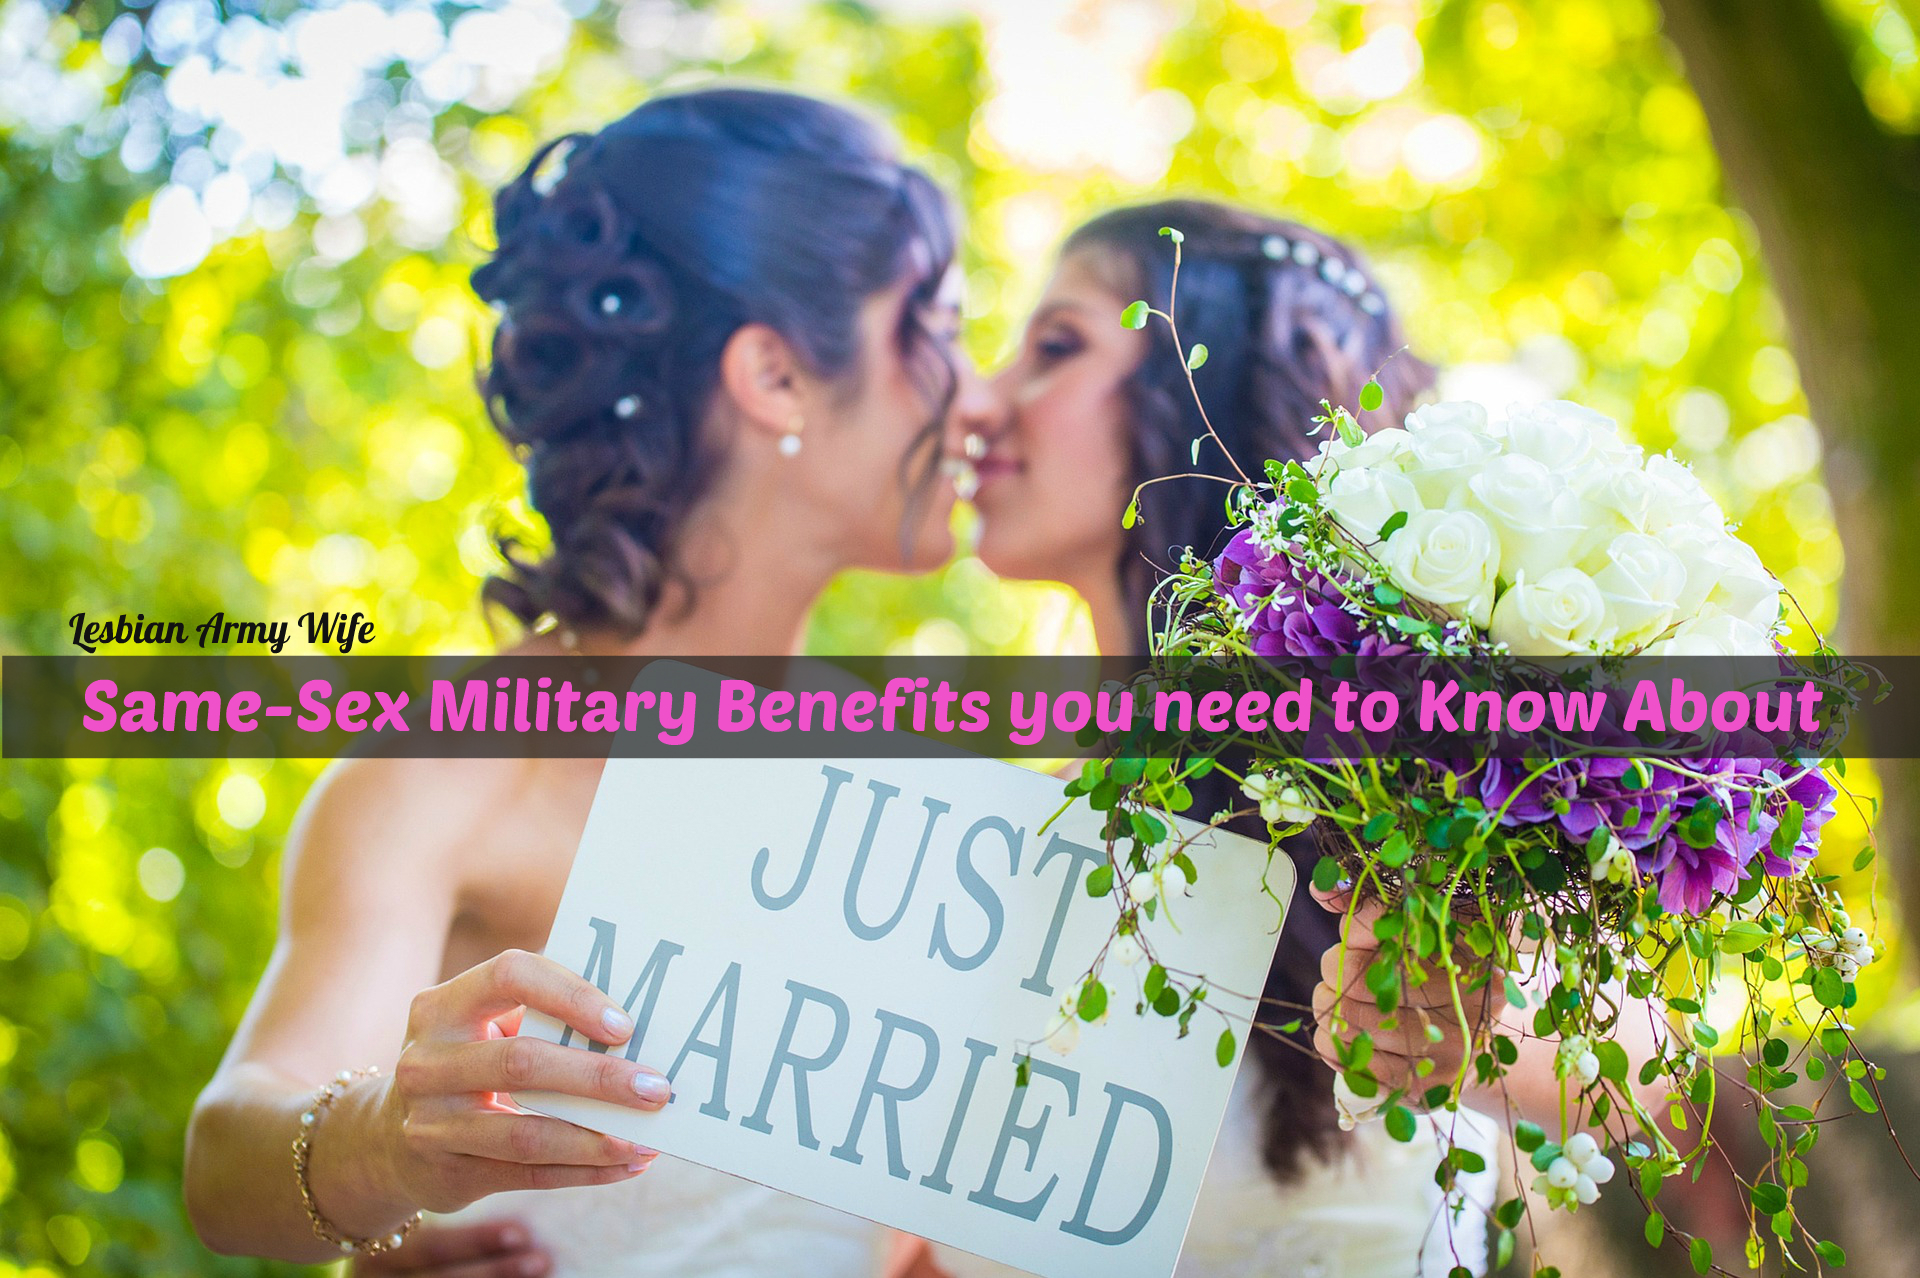 Same-Sex Marriage Military Benefits you need to know about